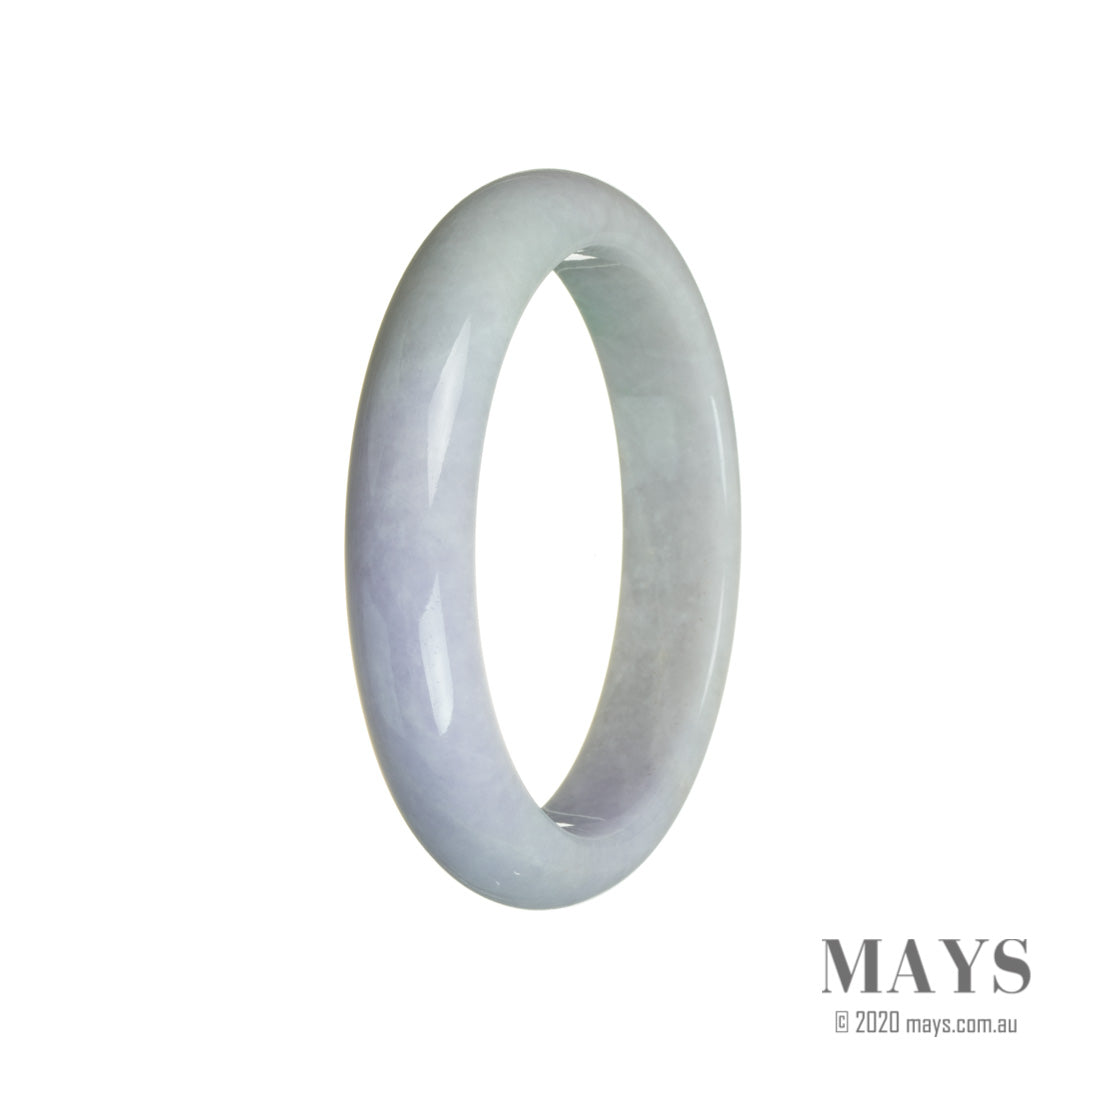 A stunning lavender jade bracelet with a real grade A quality. The bracelet features a 60mm half moon shape, designed by MAYS™.